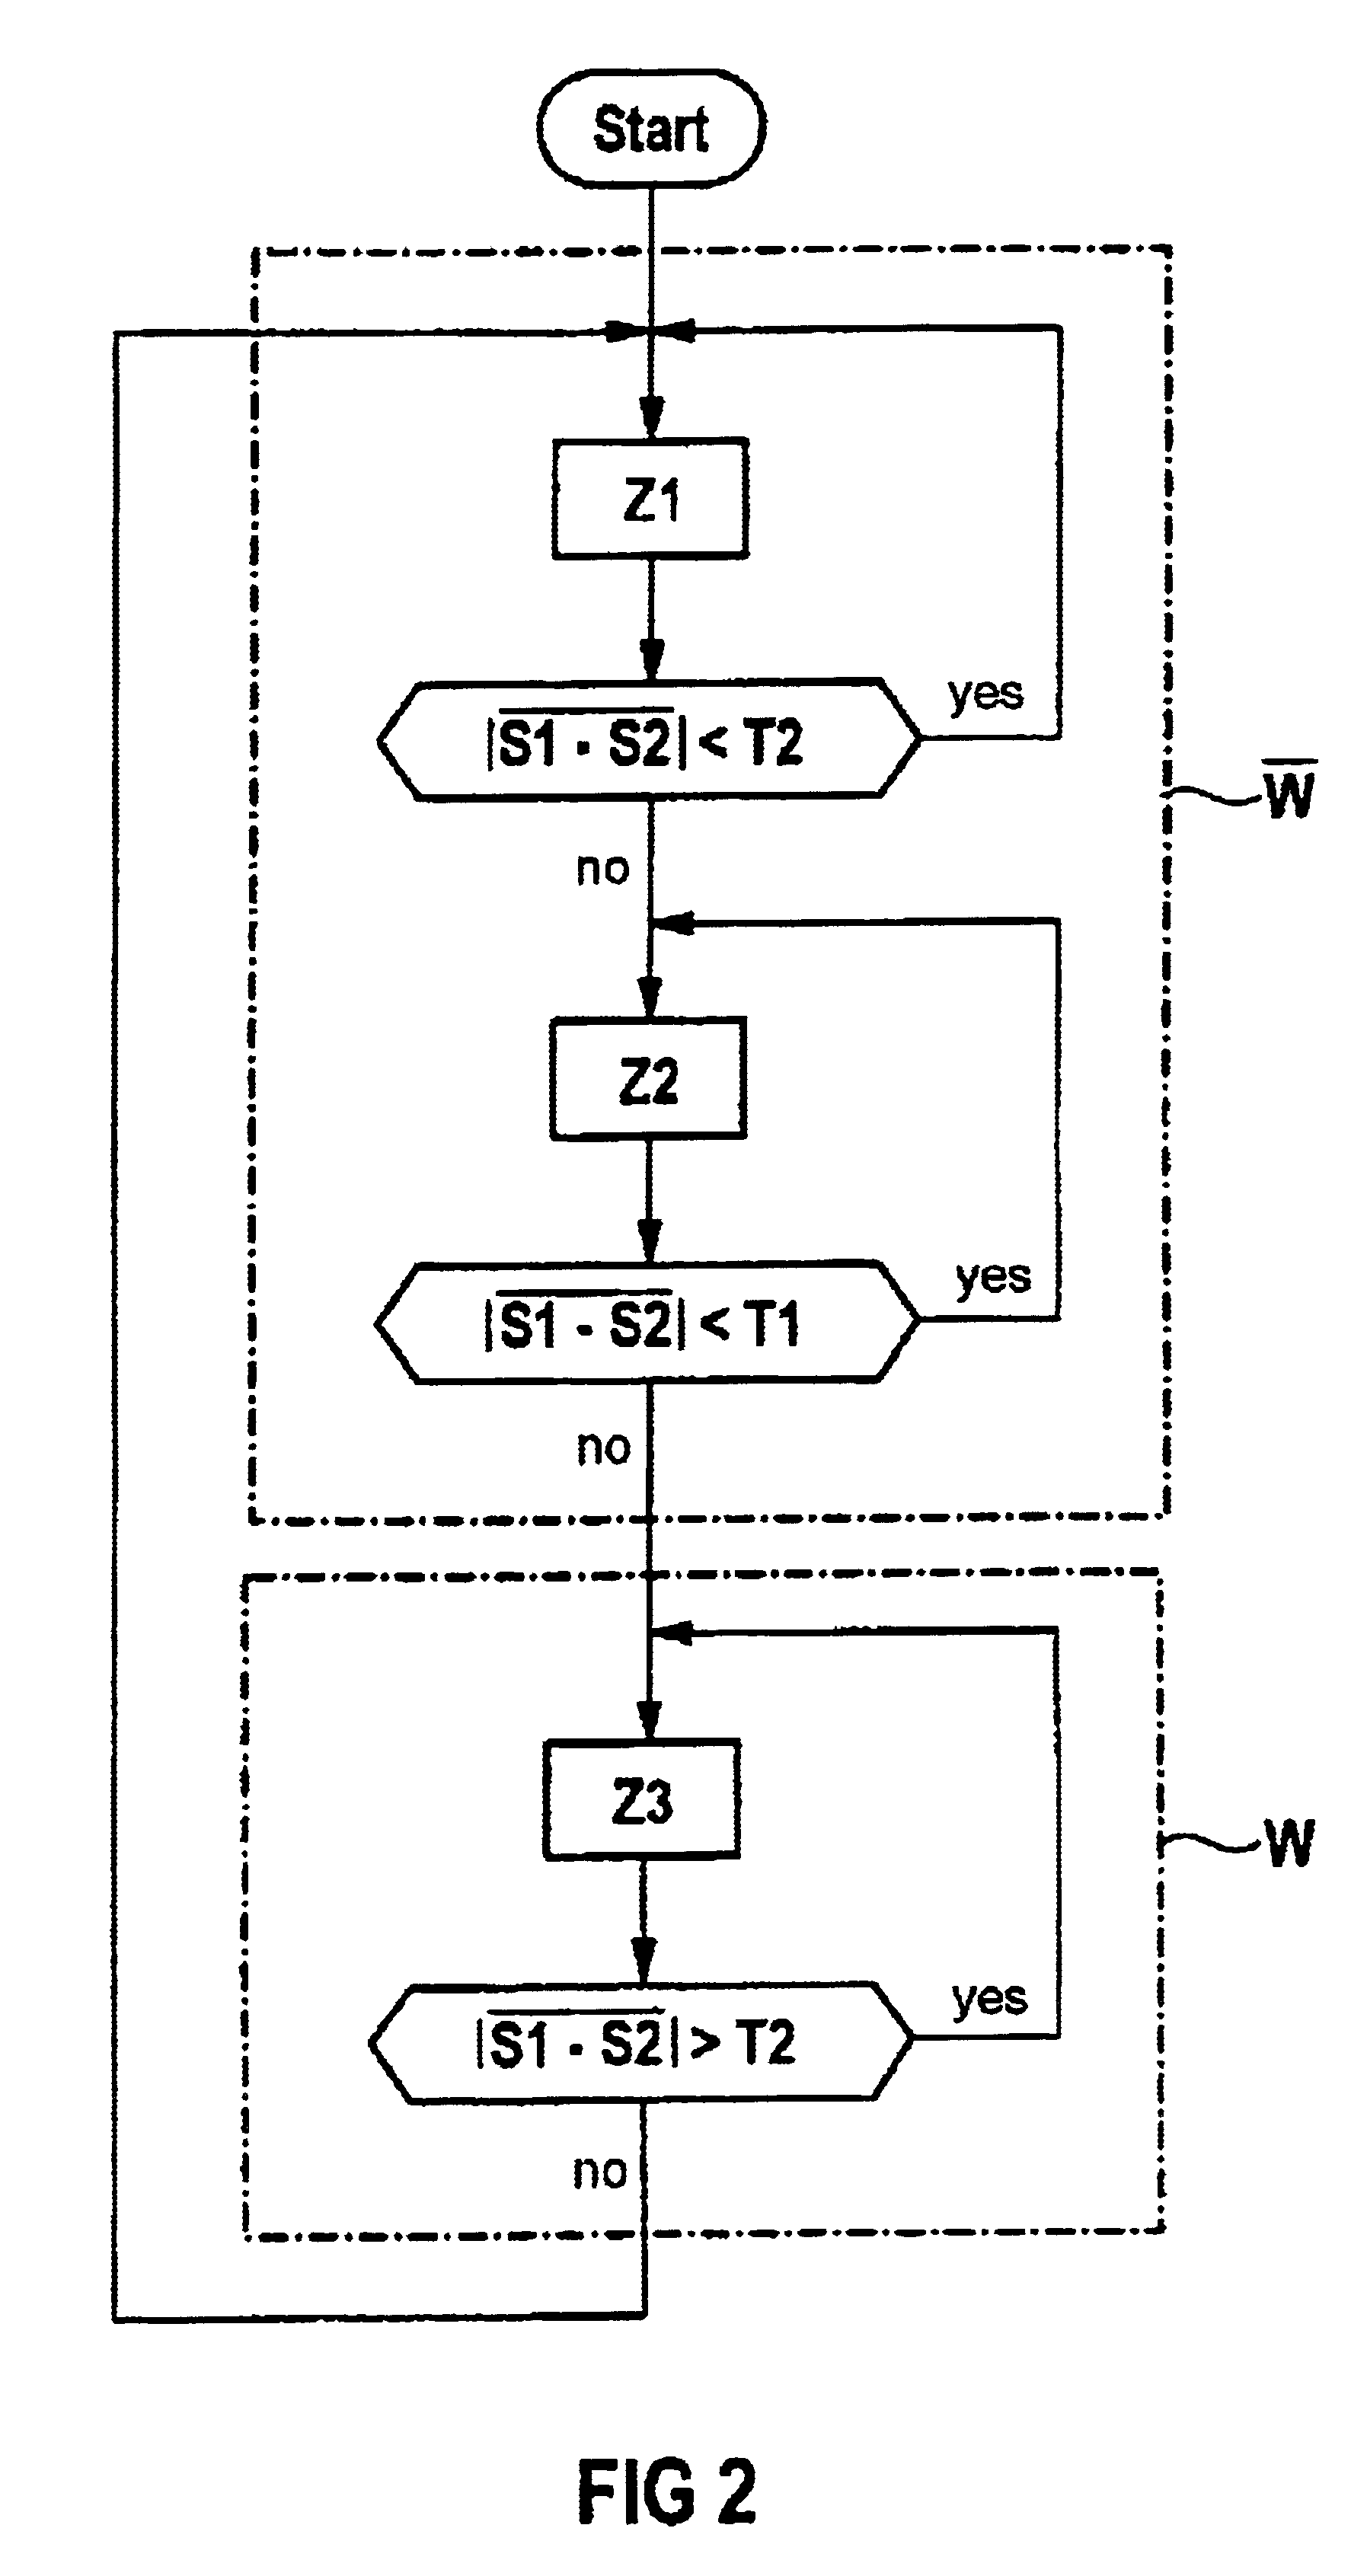 Method for operating a hearing aid or hearing aid system, and a hearing aid and hearing aid system